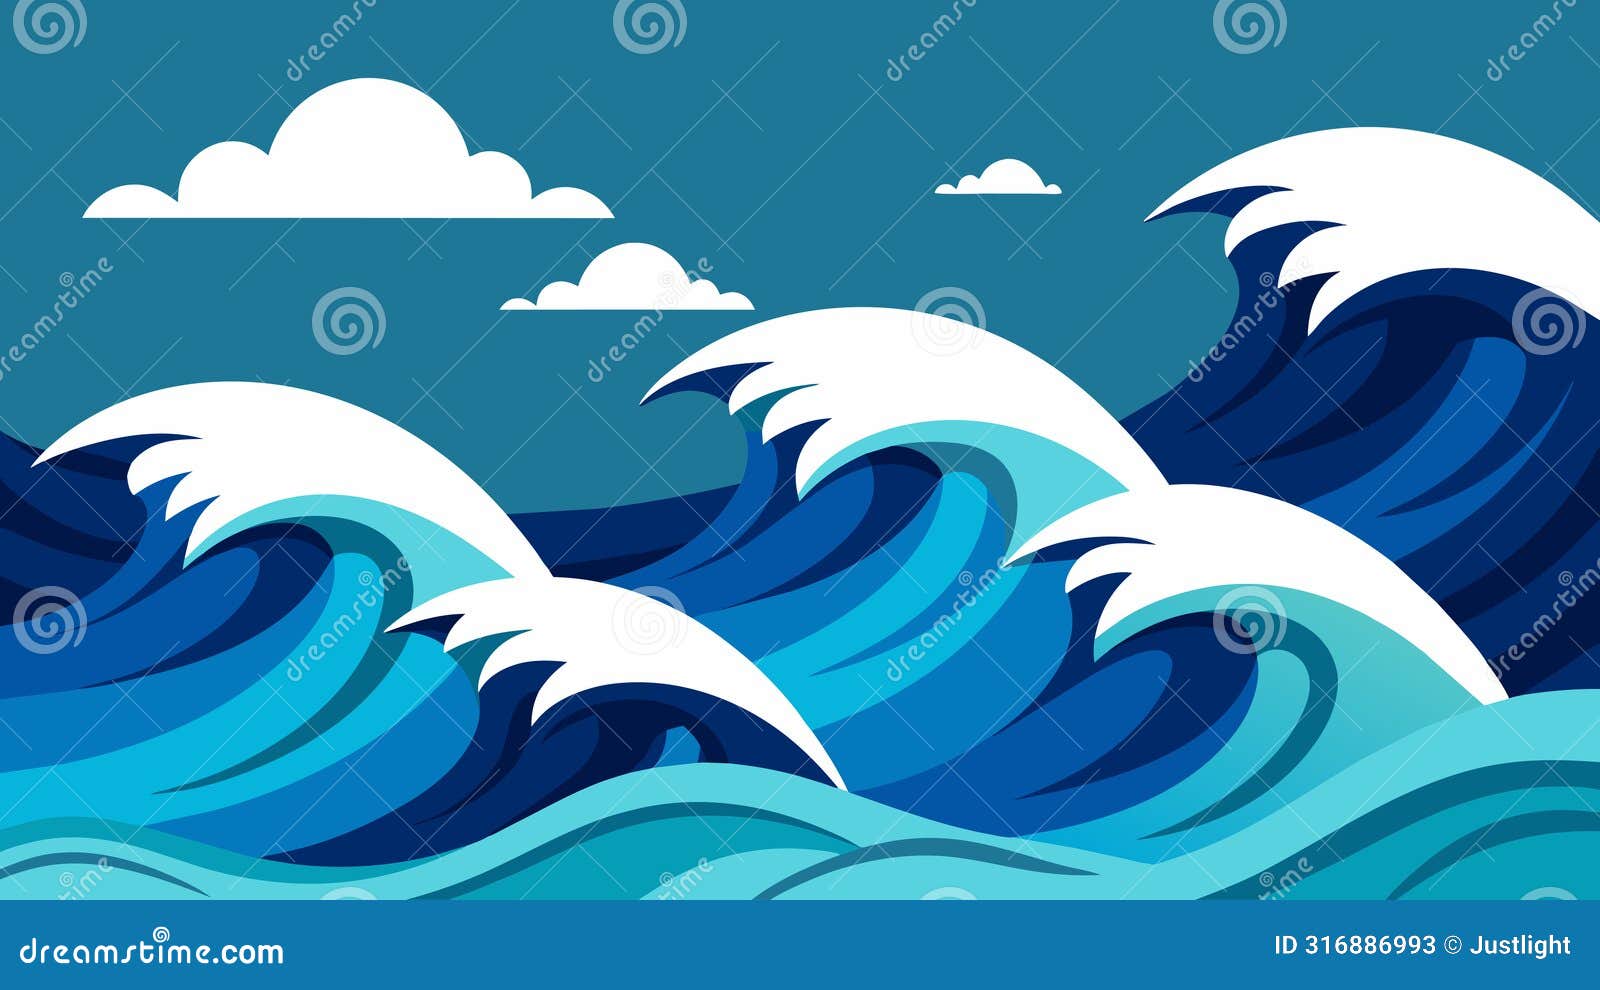 the choppy waves resemble the ups and downs of emotions experienced by individuals during periods of unrest ranging from